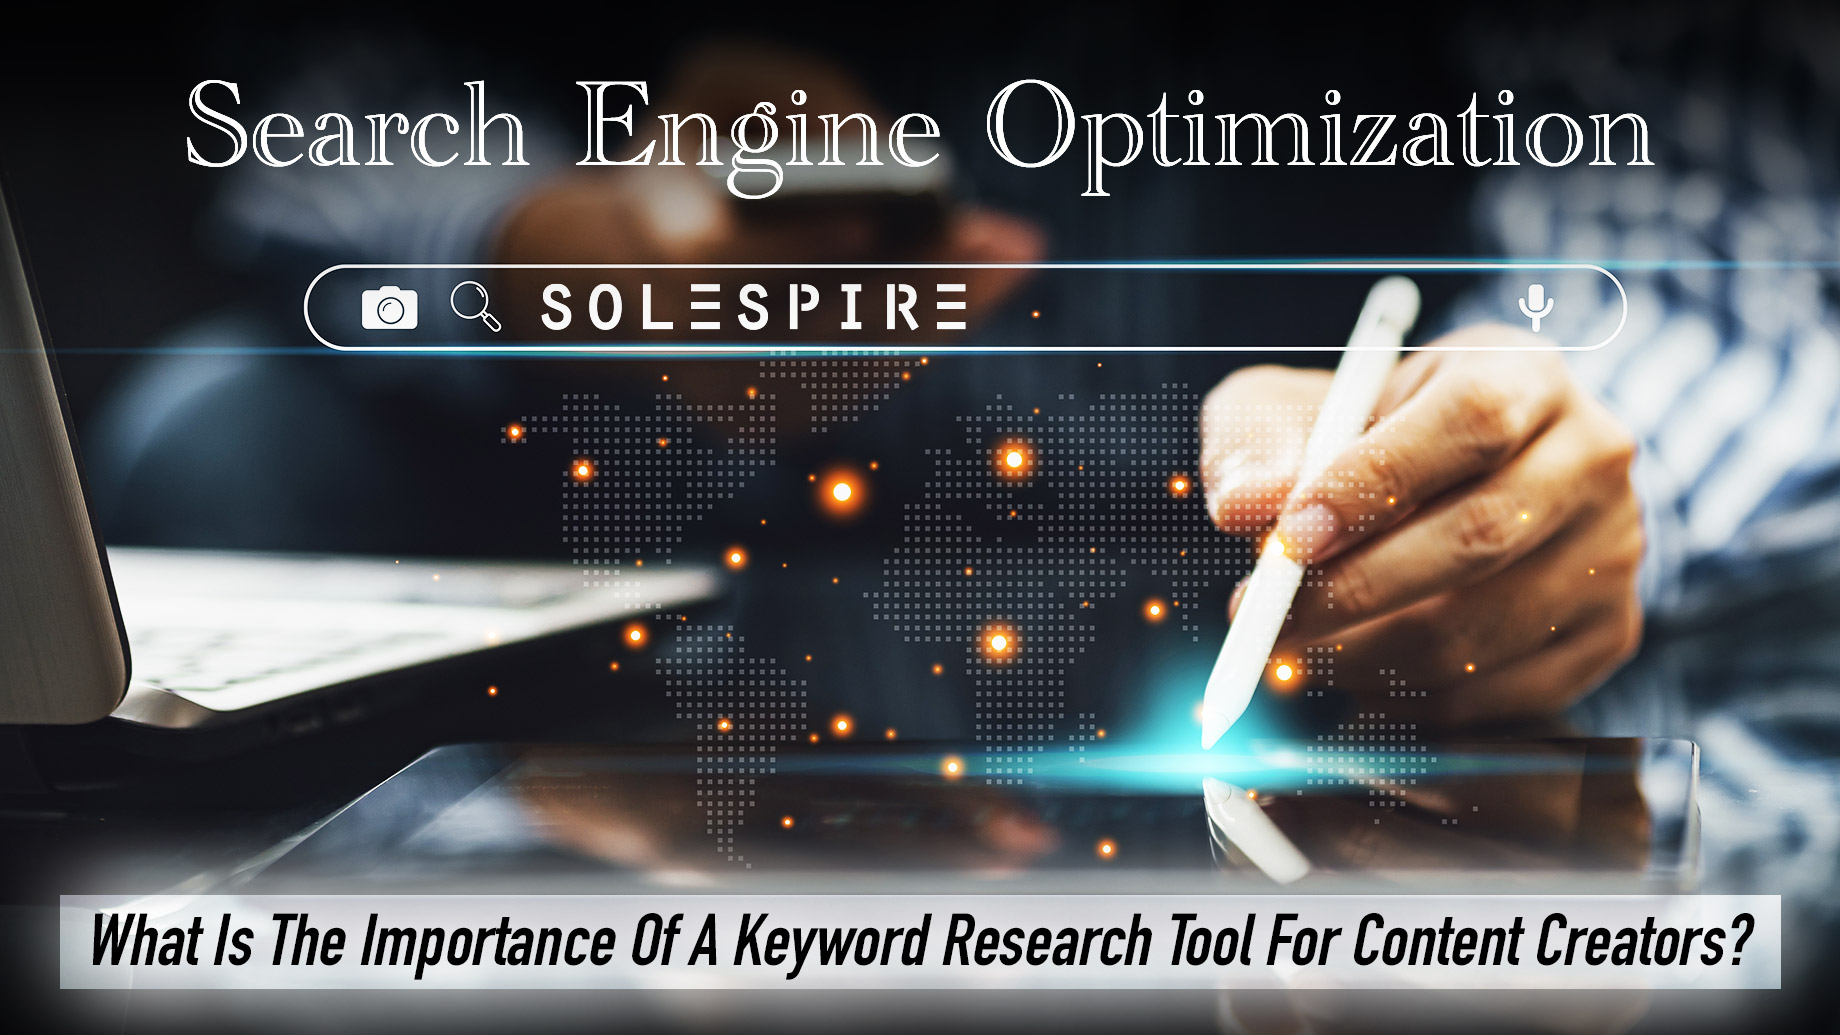 What Is The Importance Of A Keyword Research Tool For Content Creators?